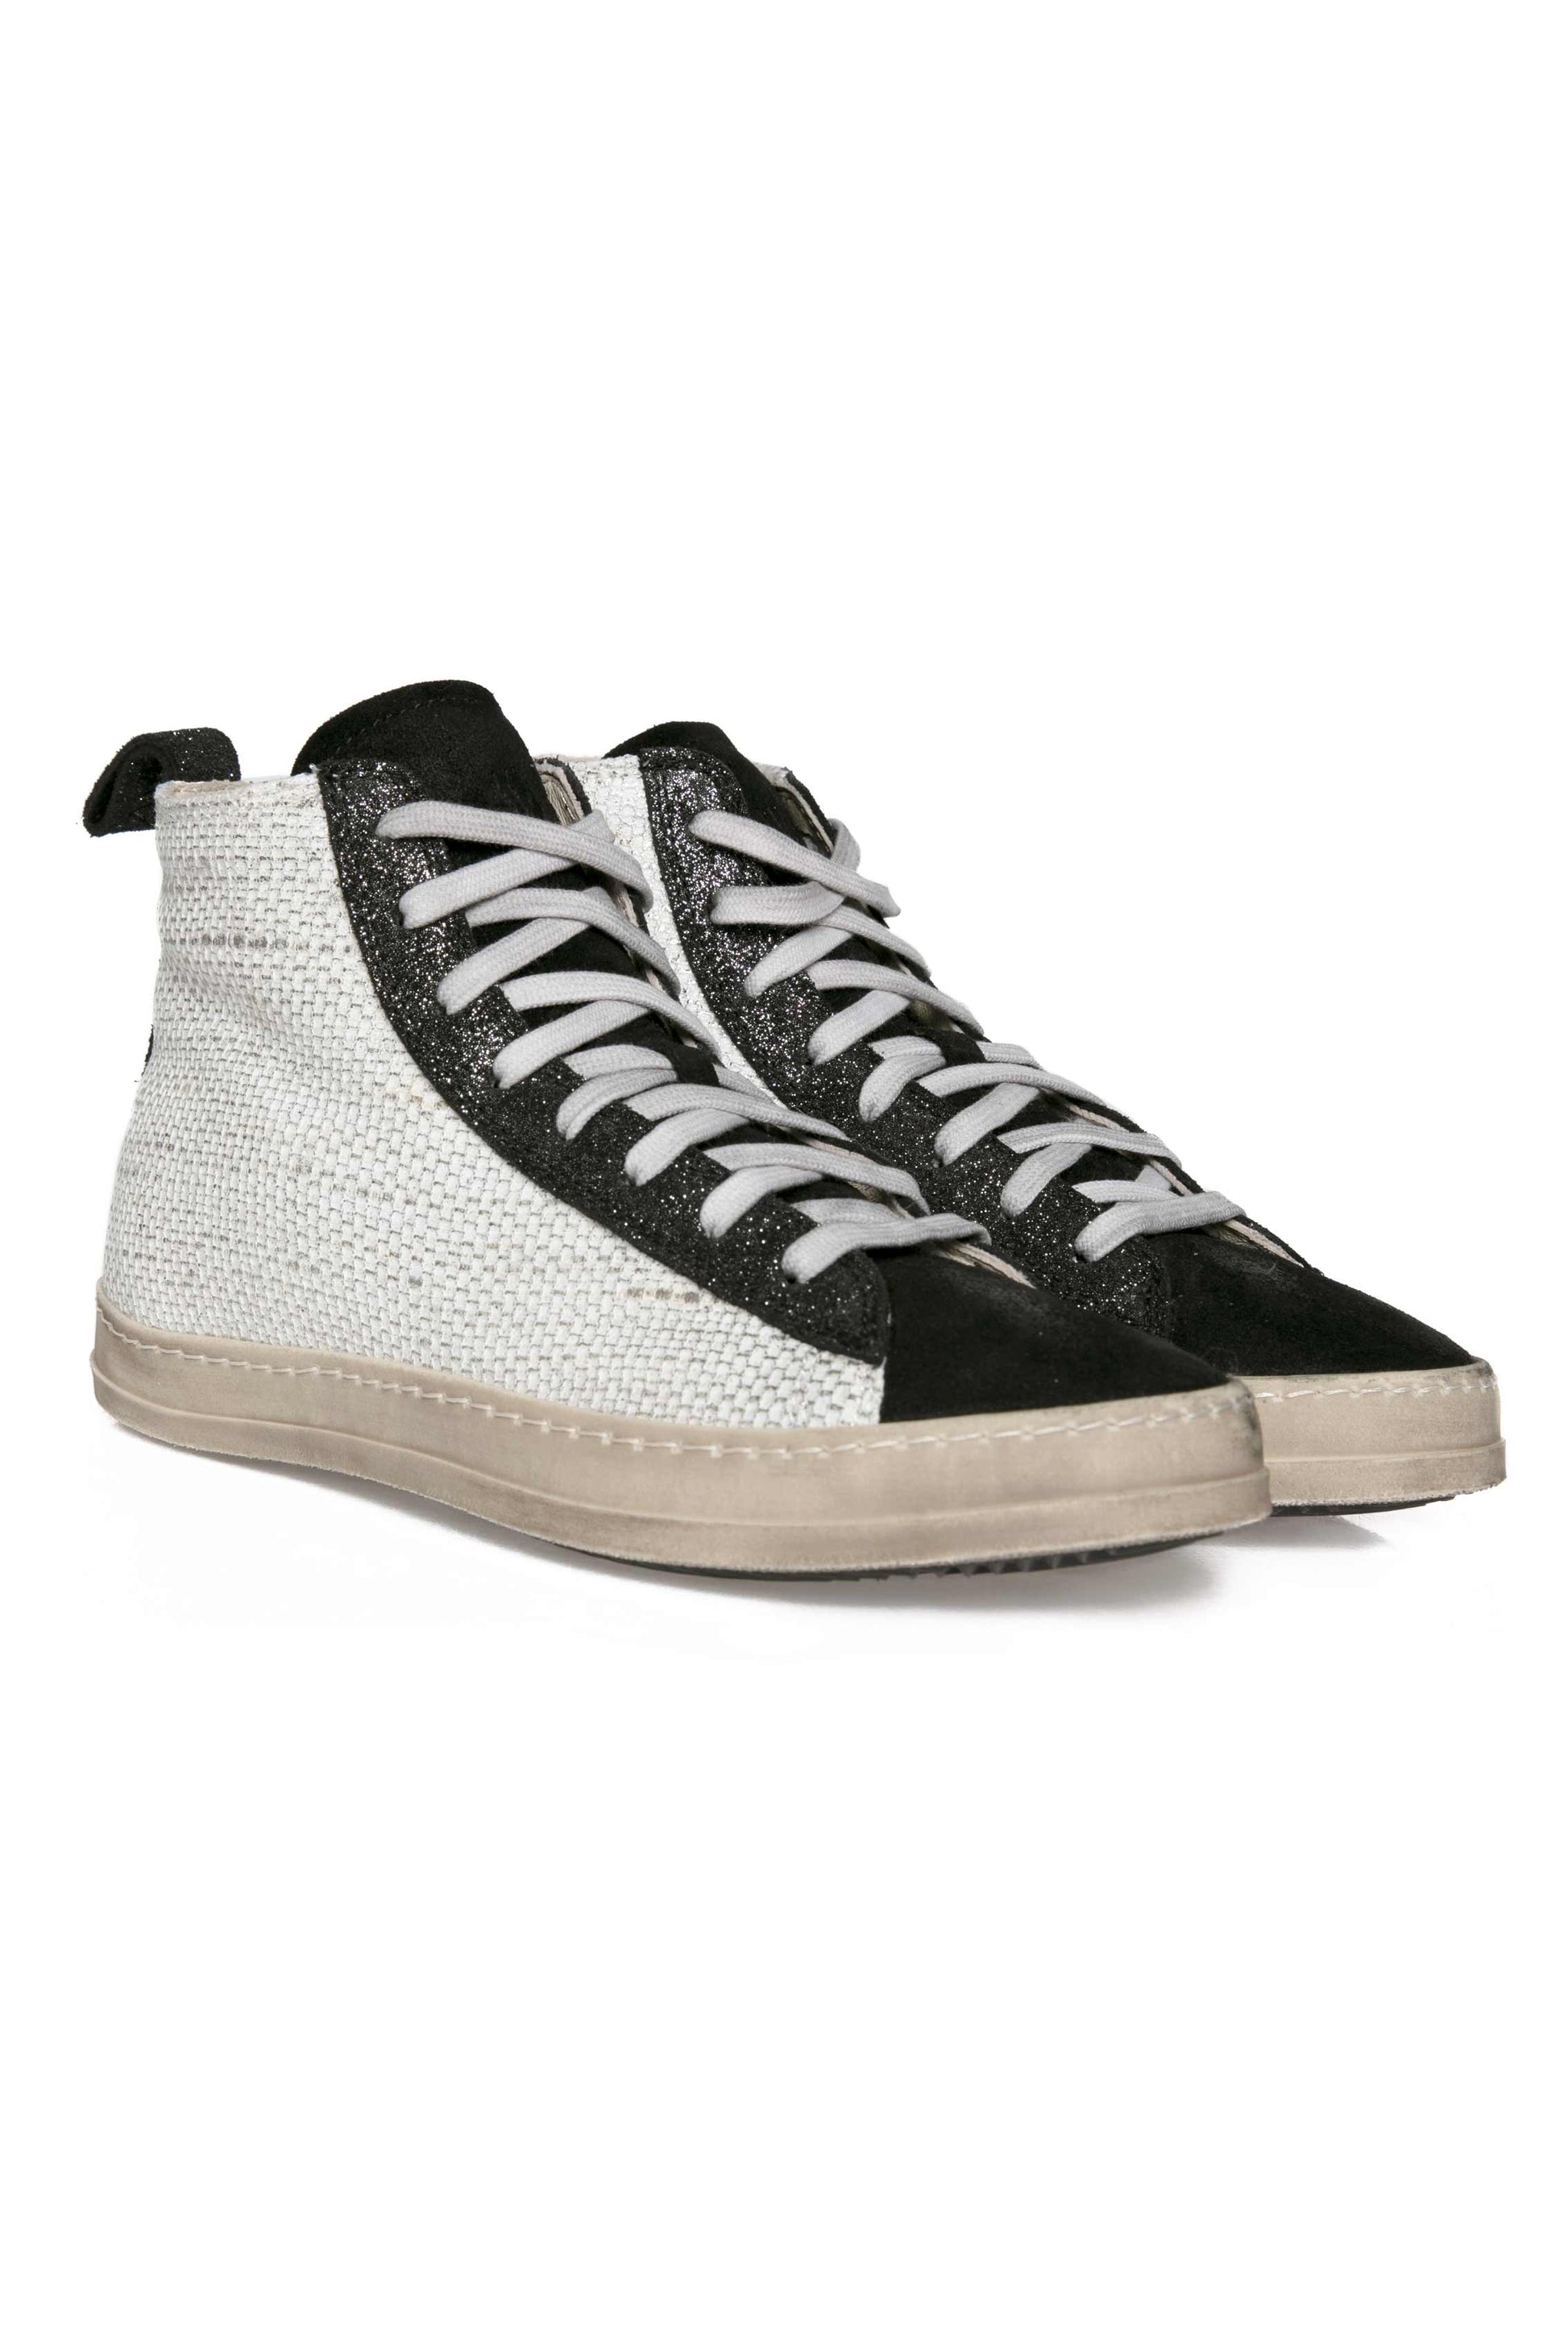 AVANT TOI Leather Linen Cotton High Top Sneaker in Bianco and Canna Fucile